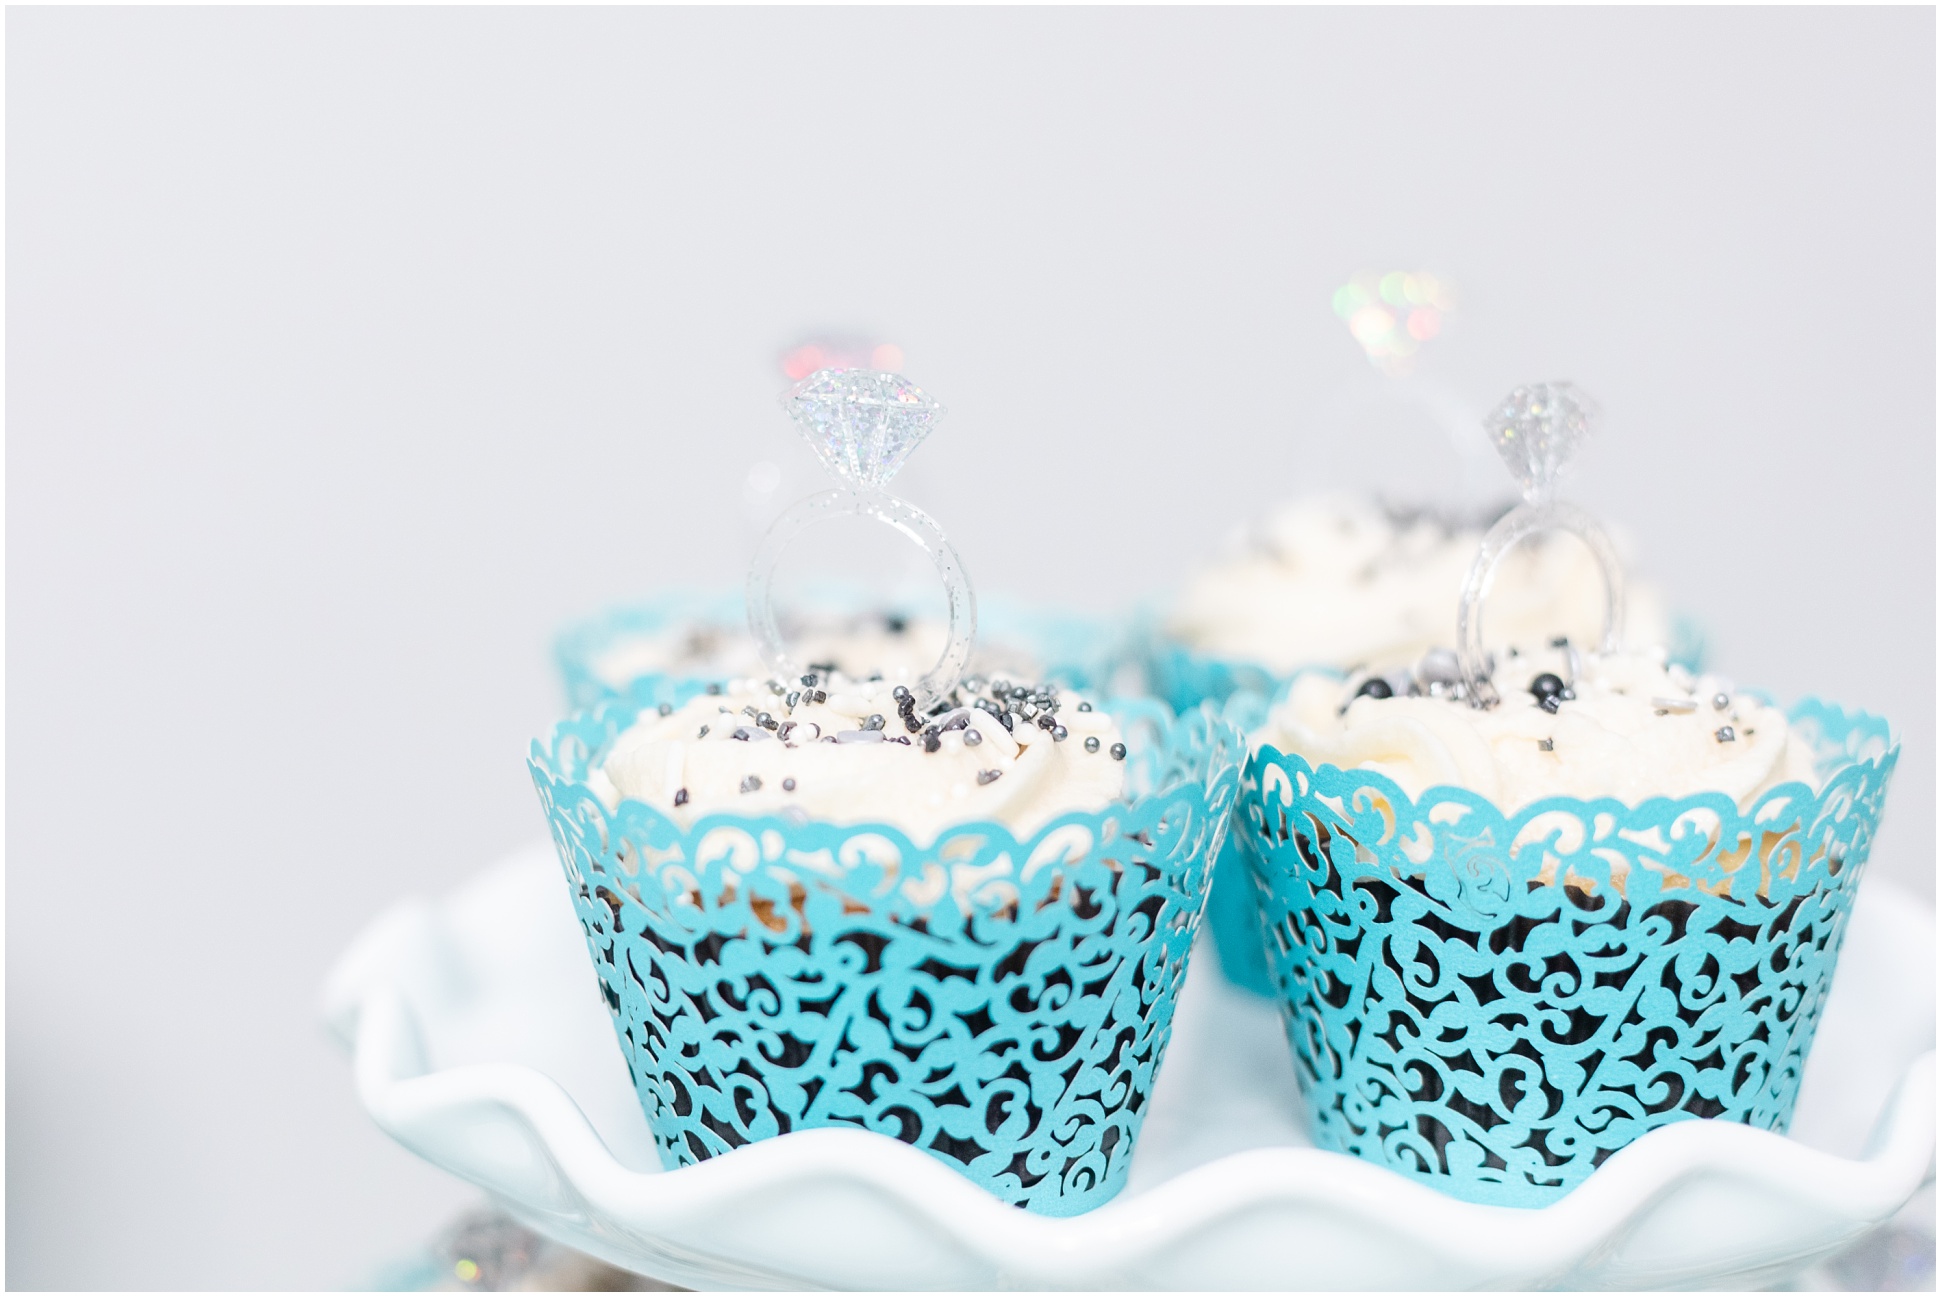 Cupcakes with white frosting and edible pearls in Tifffany blue cupcake wrappers 